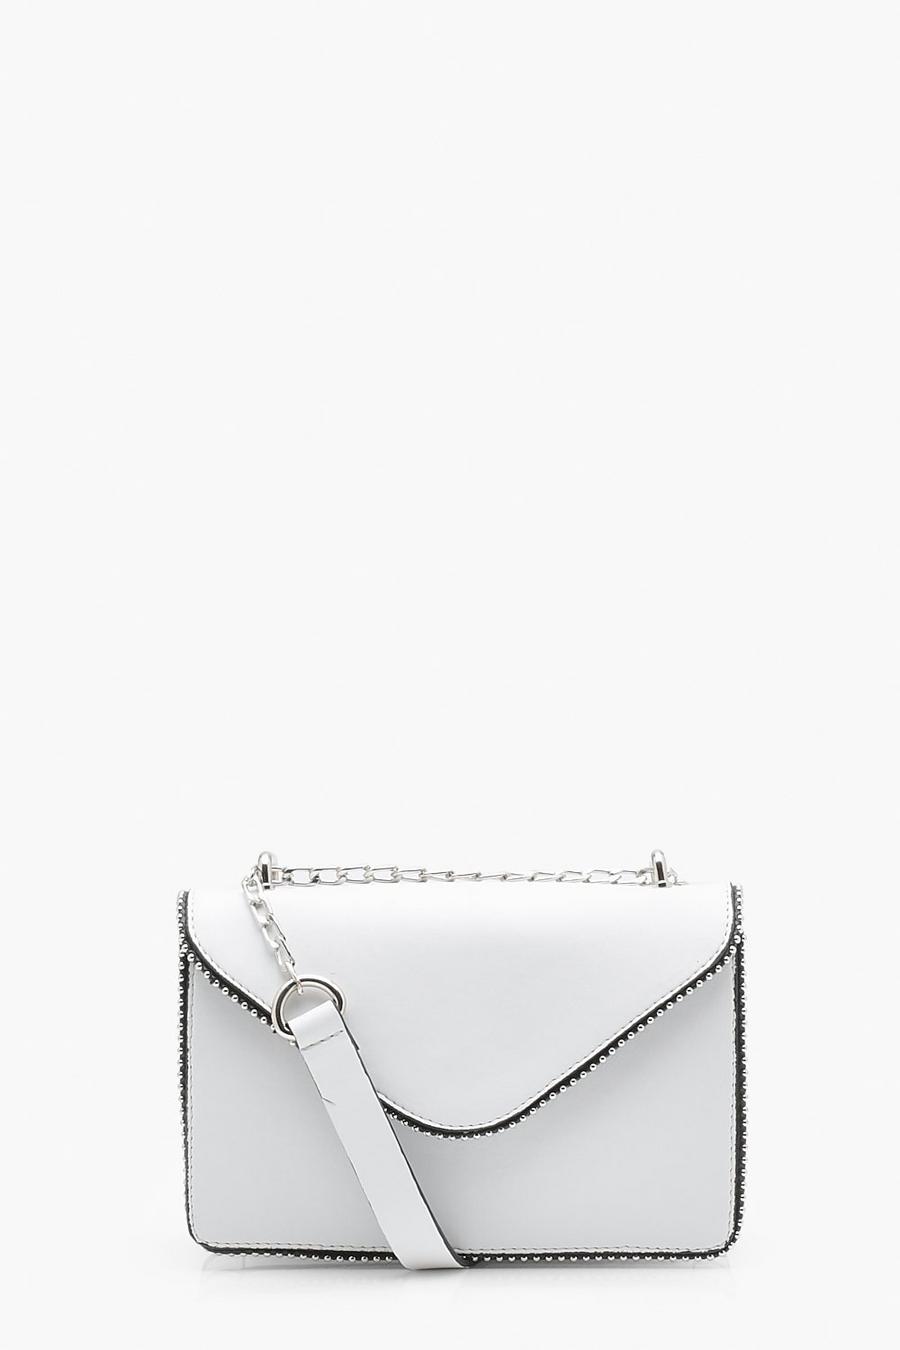 White Cross Body With Chain Trim Detail image number 1